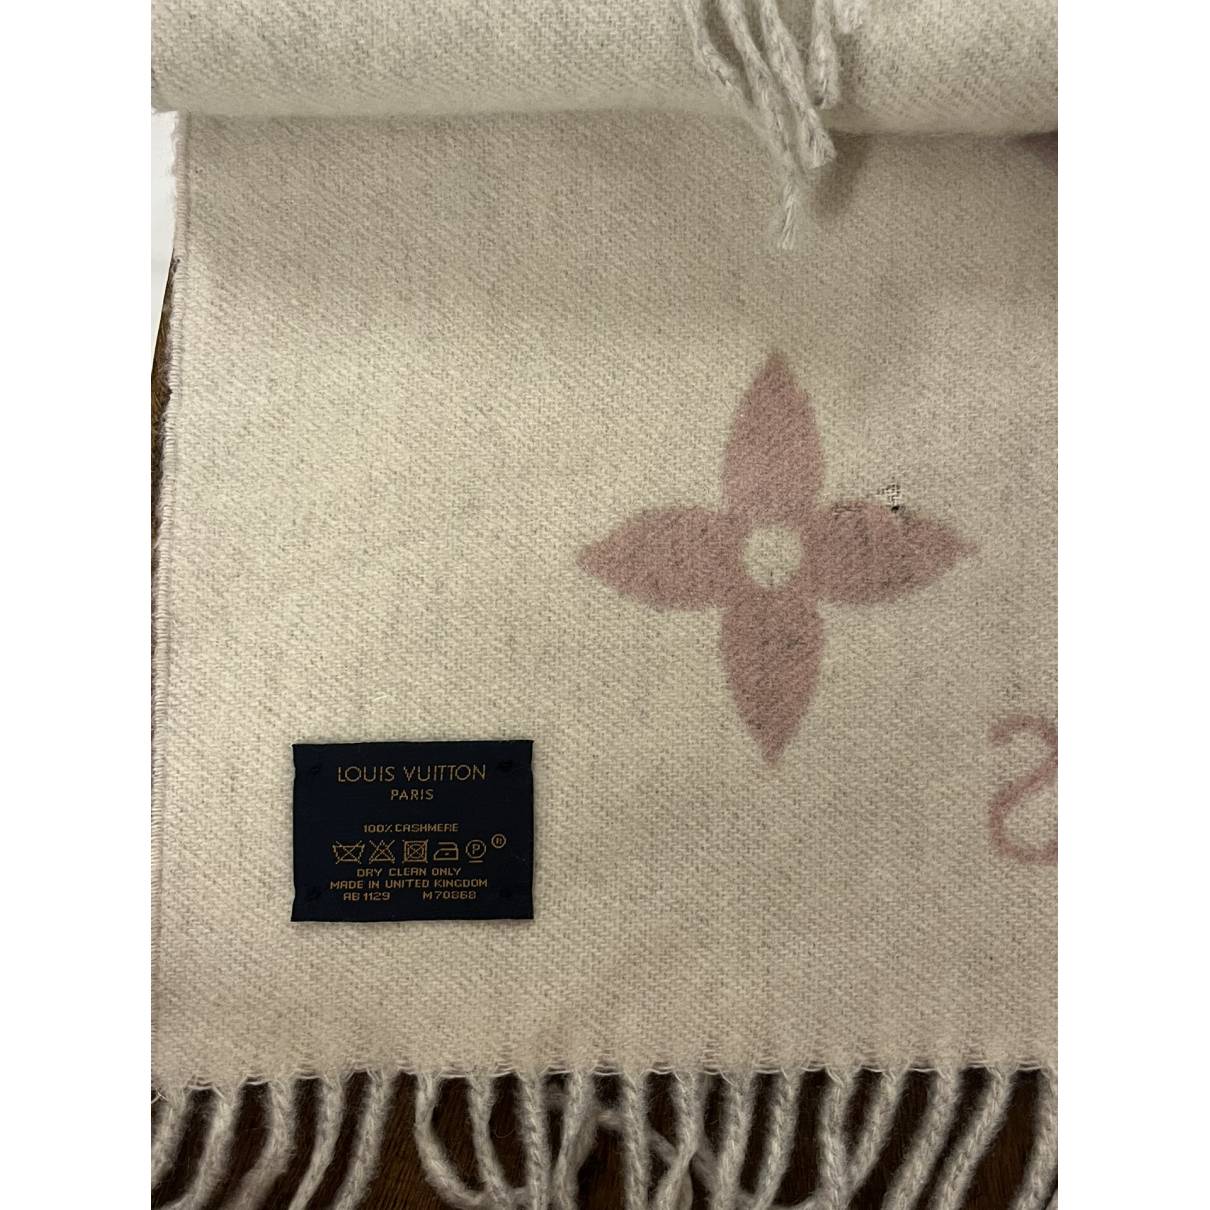 Louis Vuitton - Authenticated Reykjavik Scarf - Cashmere Pink For Woman, Good Condition